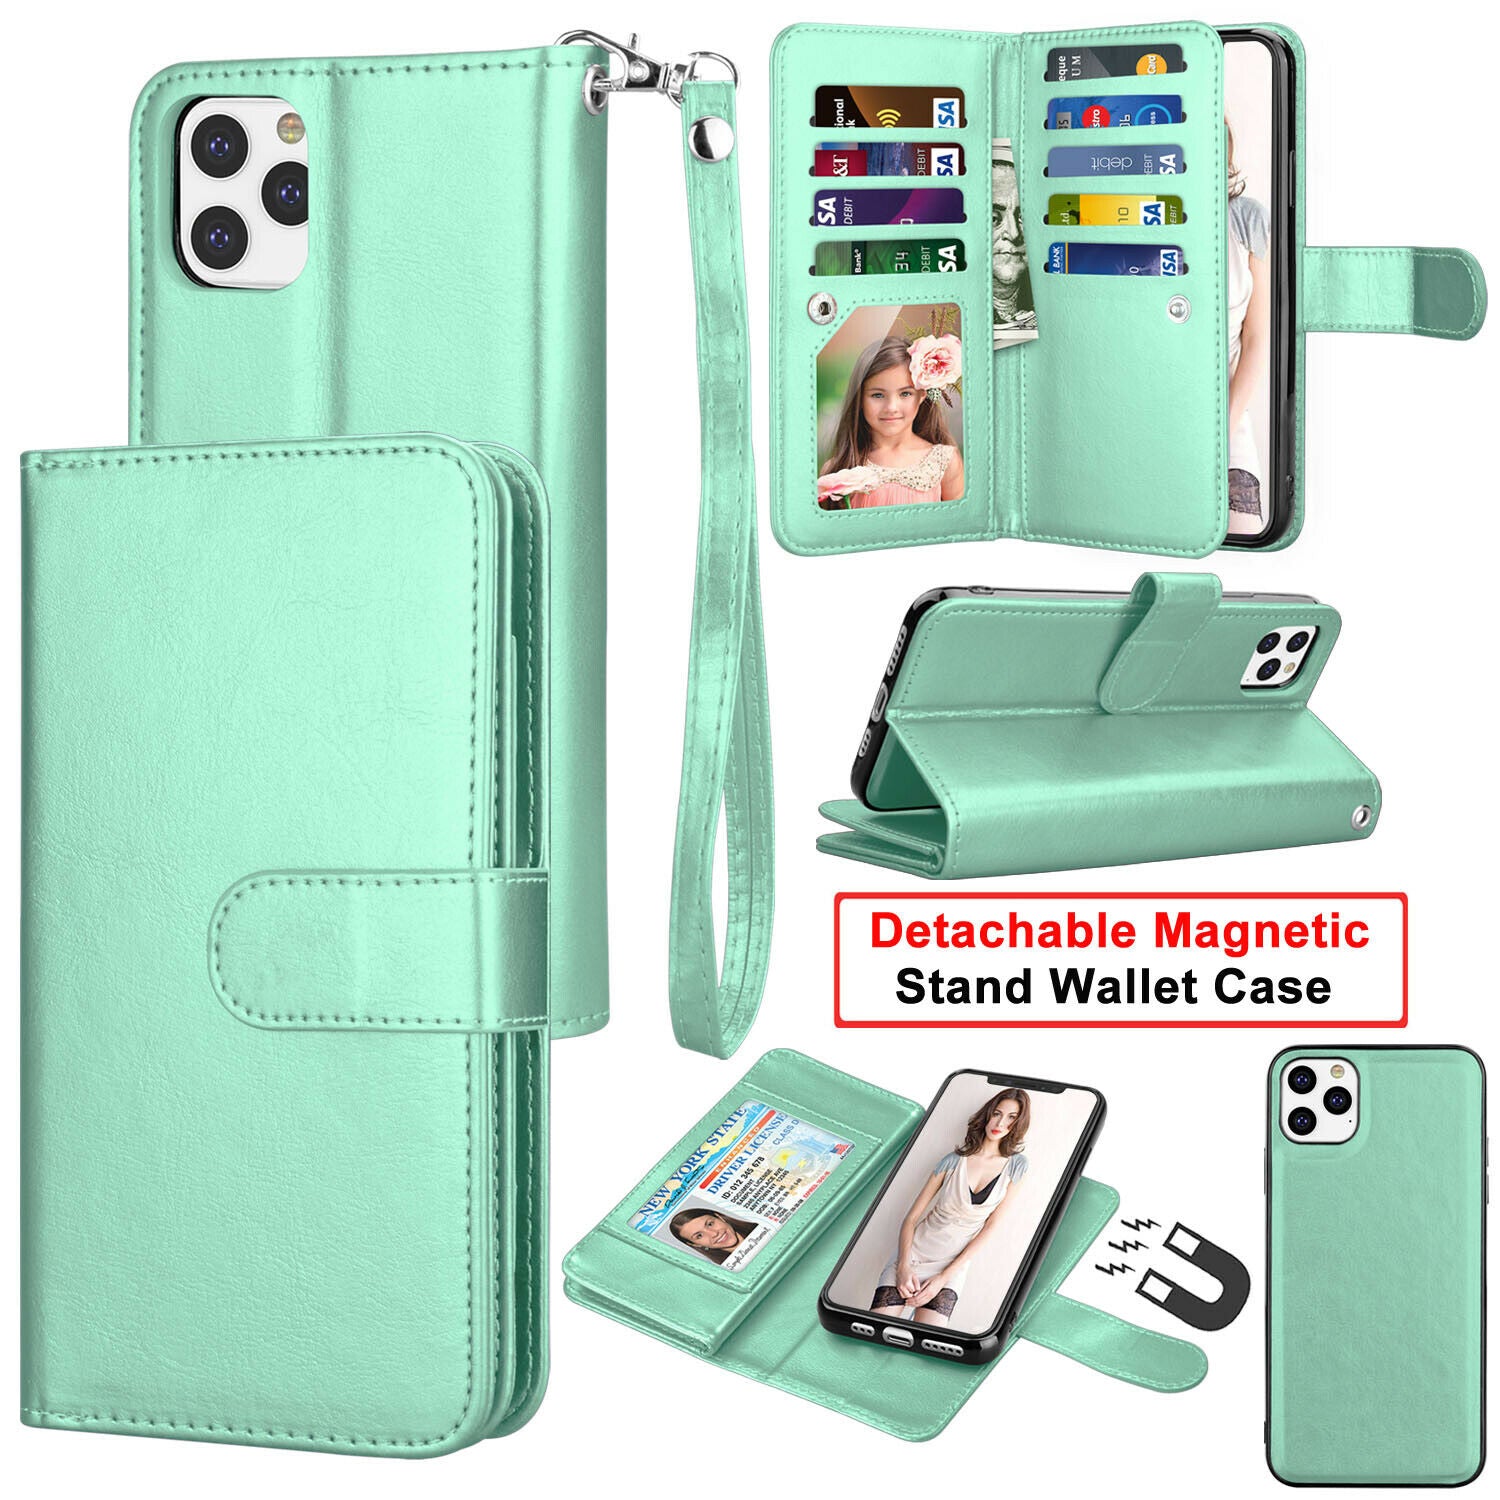 Flip Leather Wallet Case Card Holder Stand Cover For iPhone - carolay.co